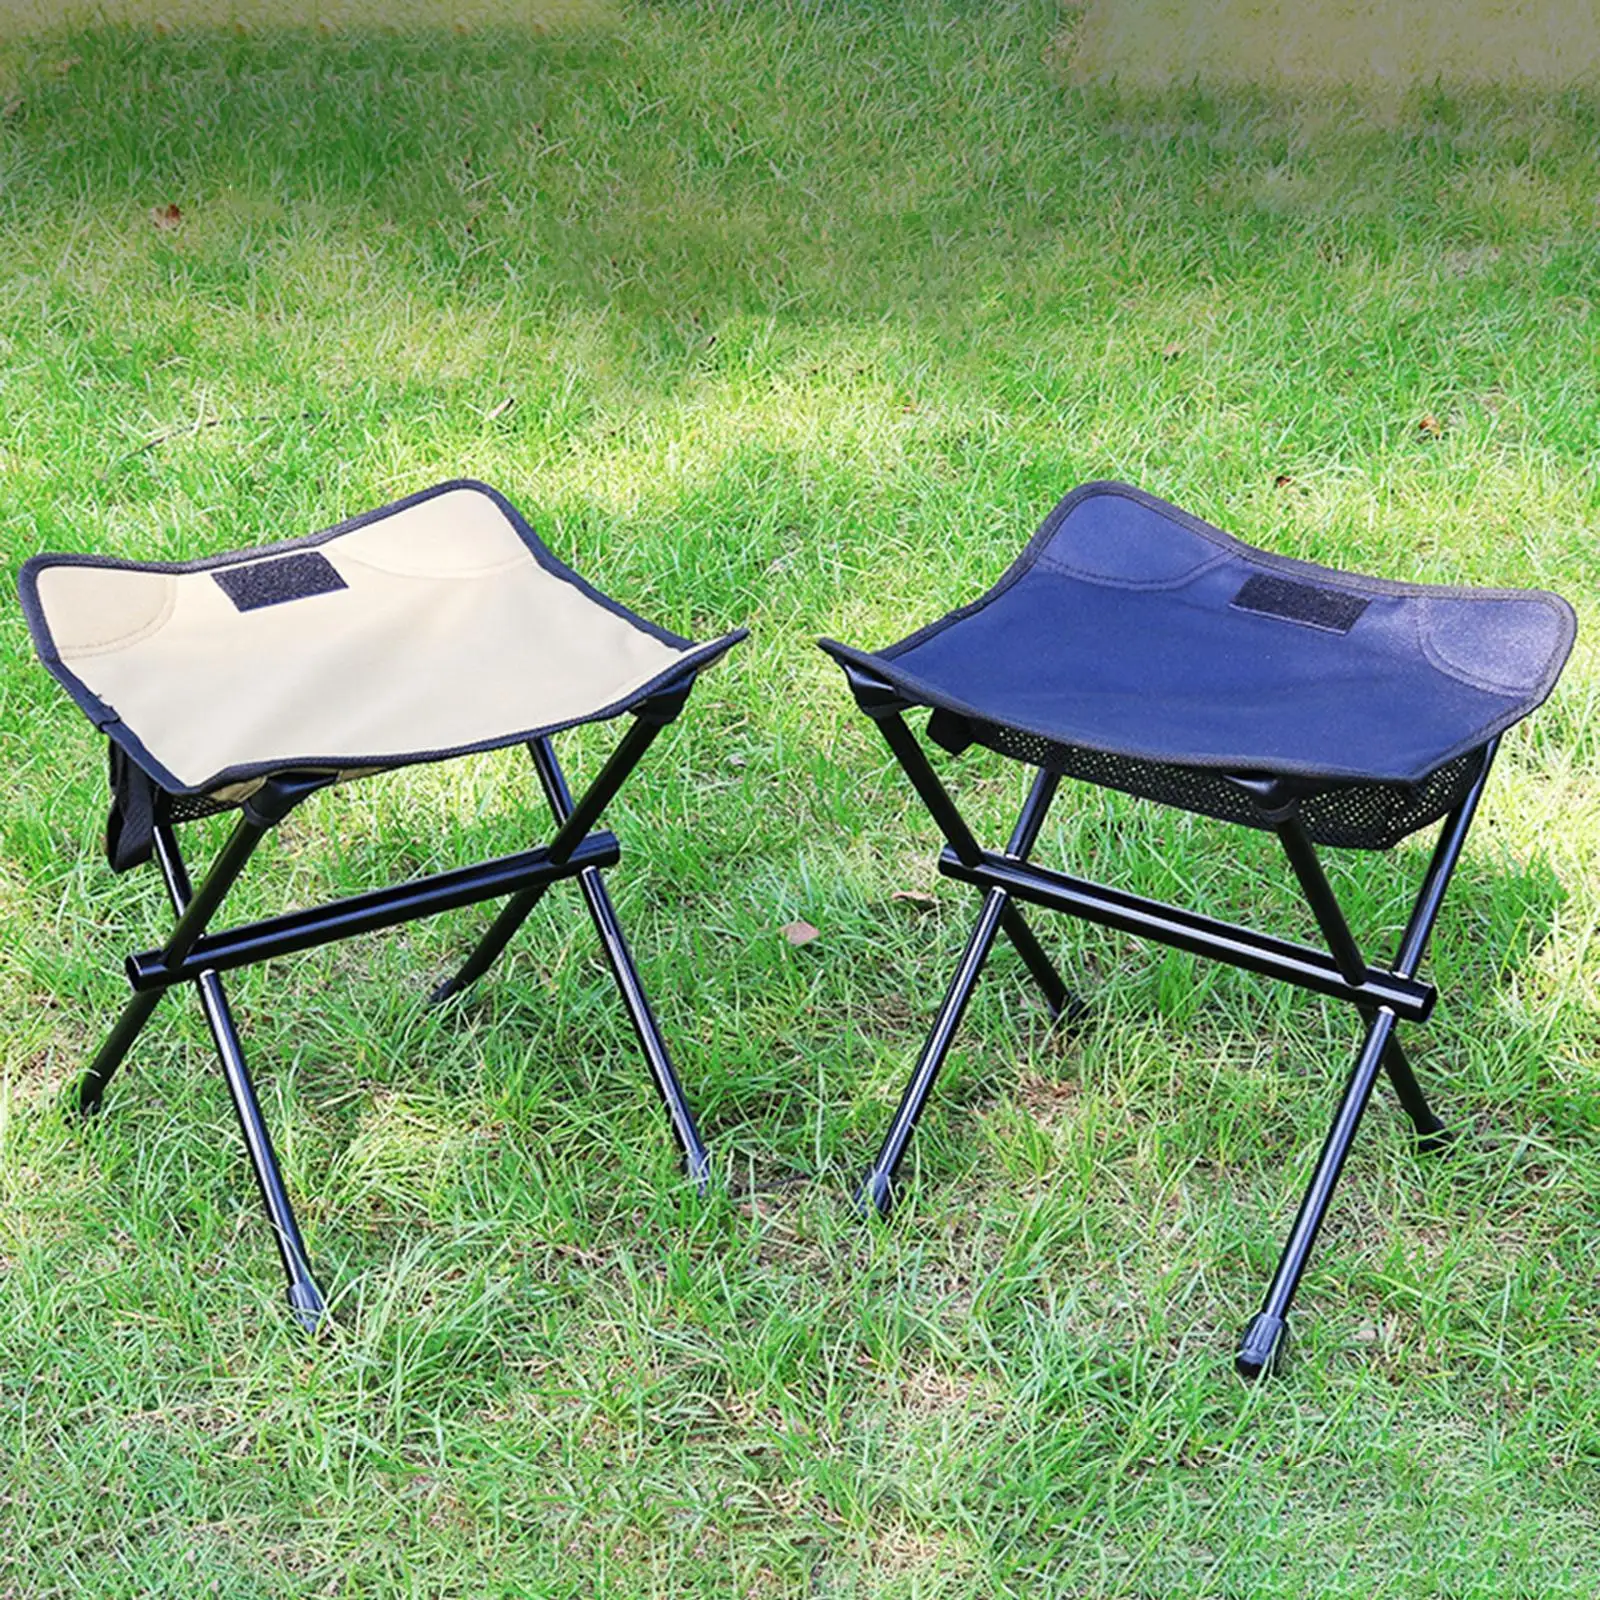 Outdoor Folding Chair Foldable Camping Stool Collapsible Stool Hiking Fishing - £20.39 GBP